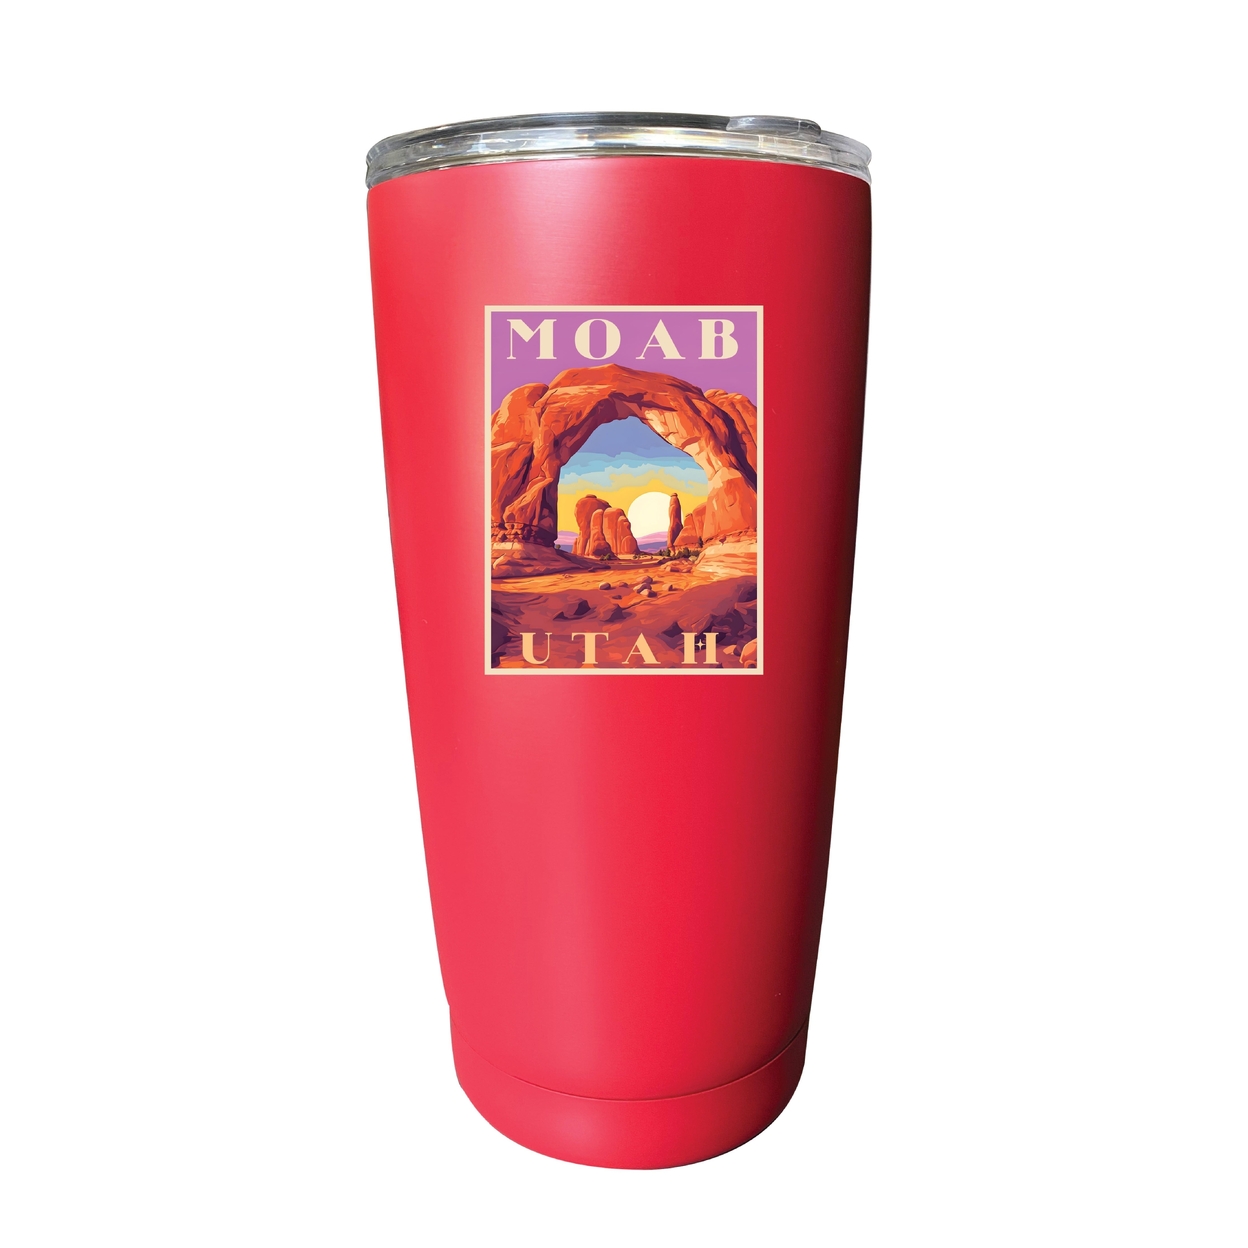 Moab Utah Souvenir 16 Oz Stainless Steel Insulated Tumbler - Red,,2-Pack